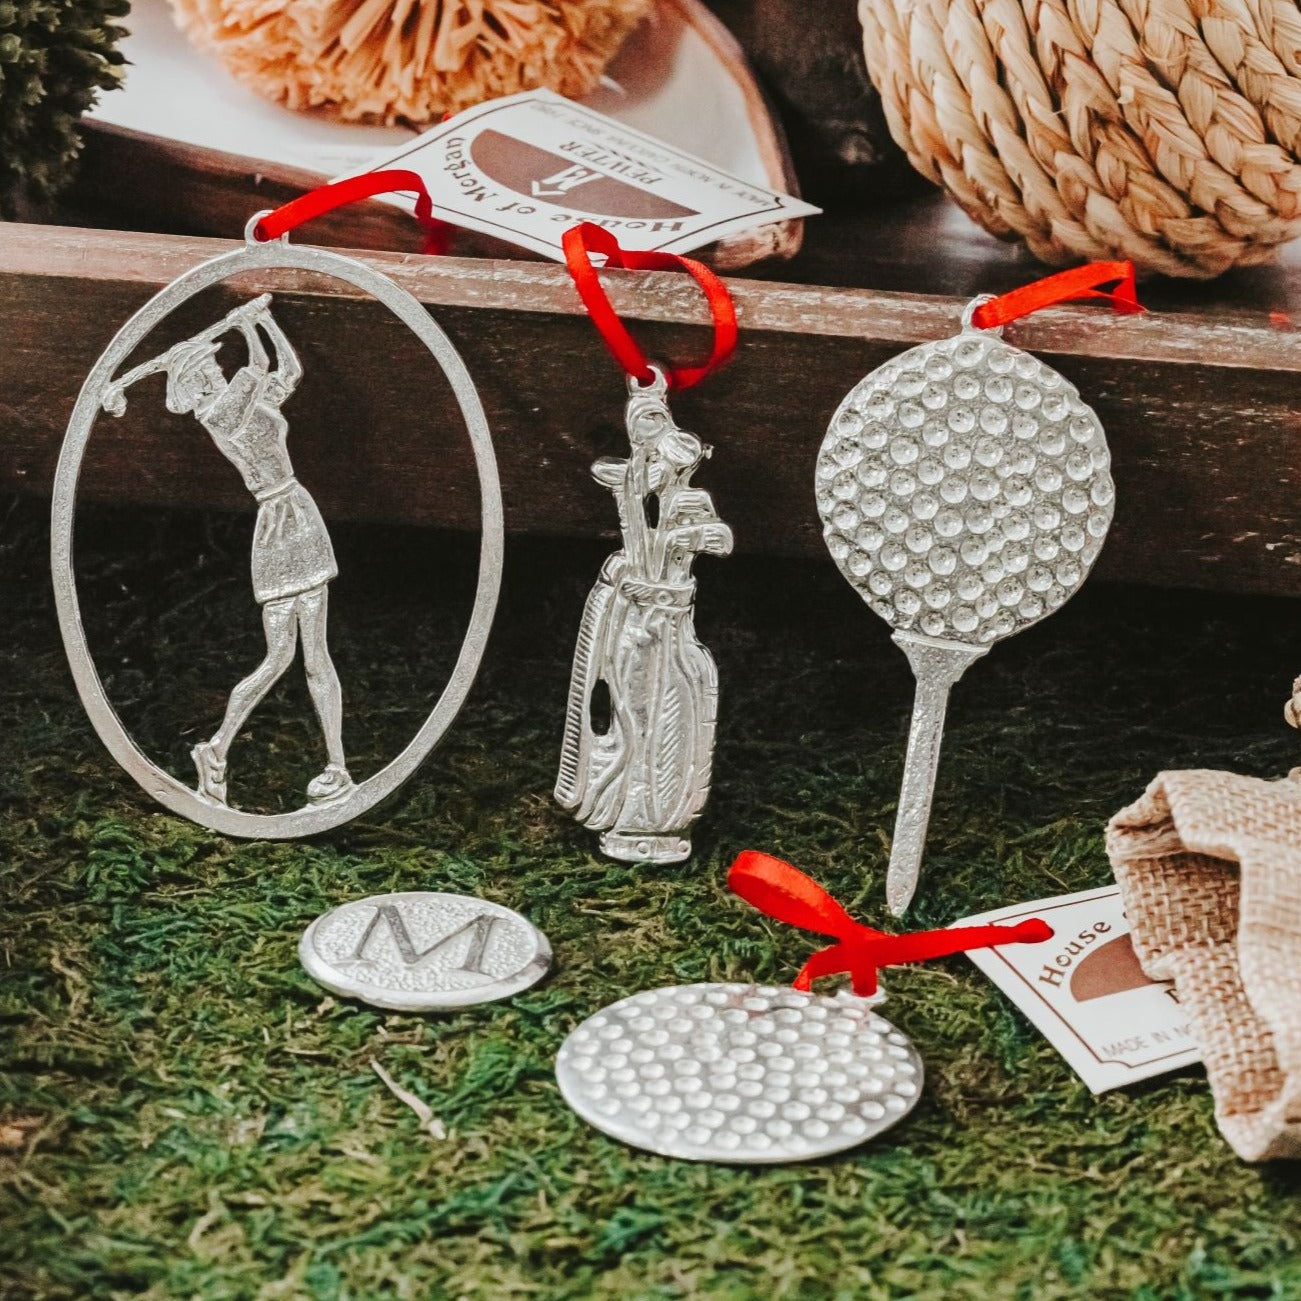 Silver Pewter Metal Golf Ornament Gift Set Top Gift Ideas - House of Morgan Pewter